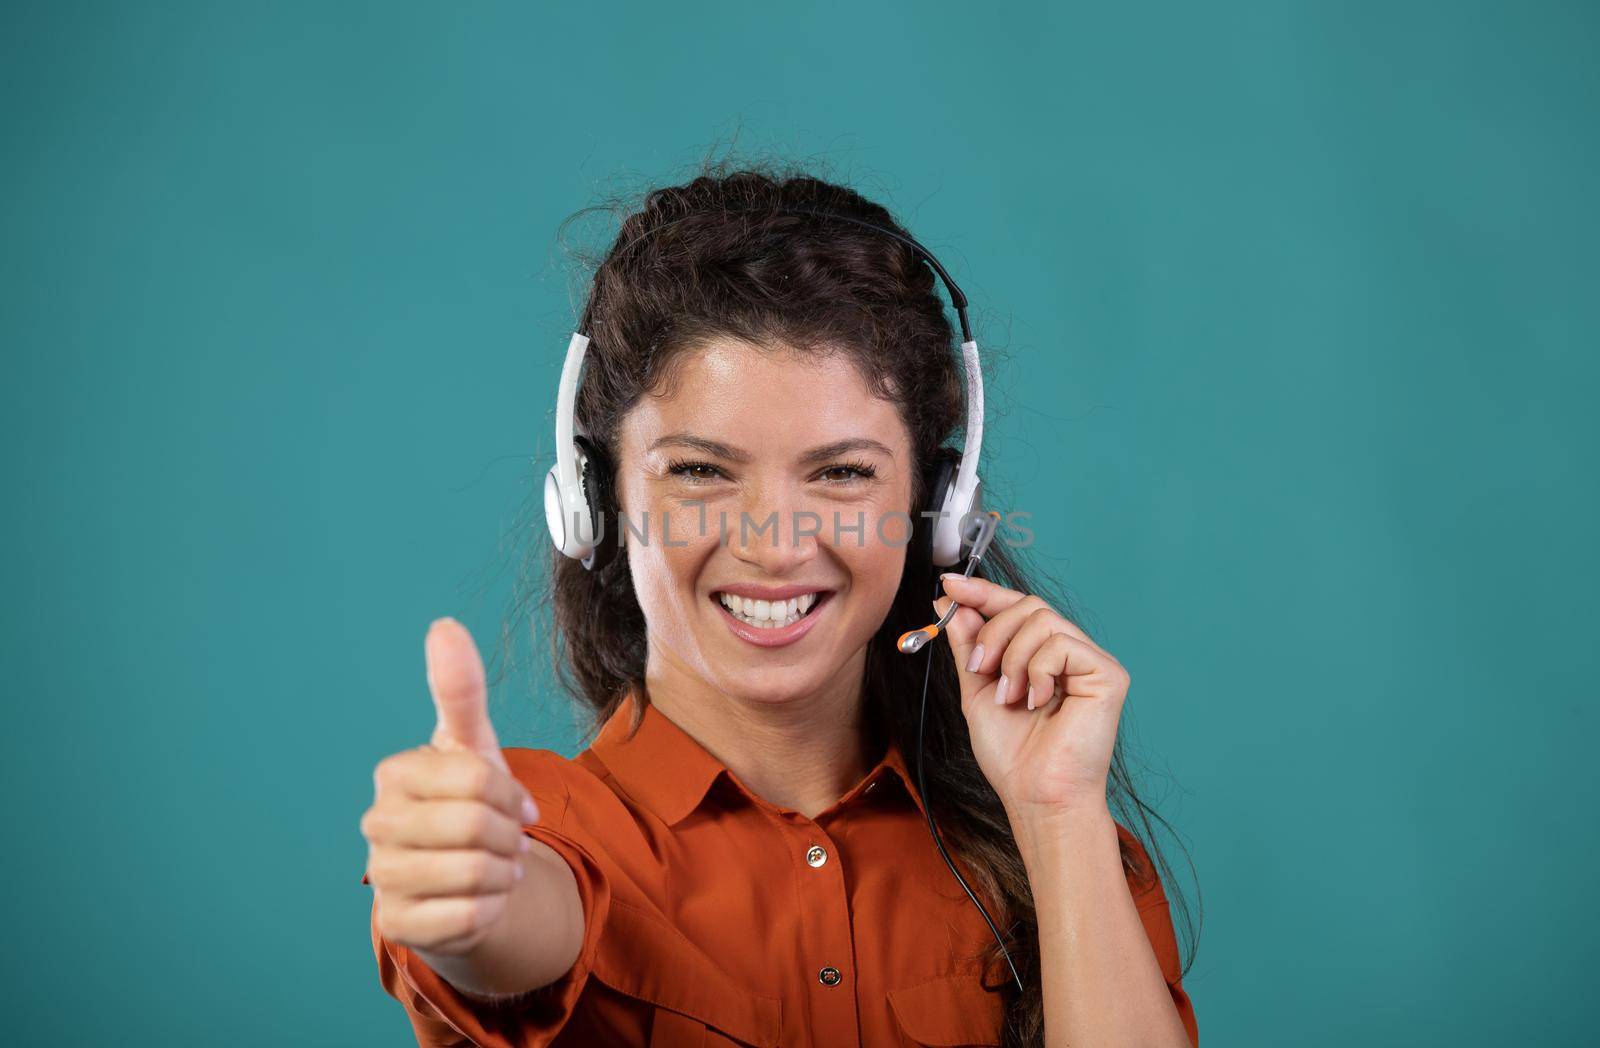 Satisfied pretty woman operator with headphones on head showing thumb up gesture in studio on blue background